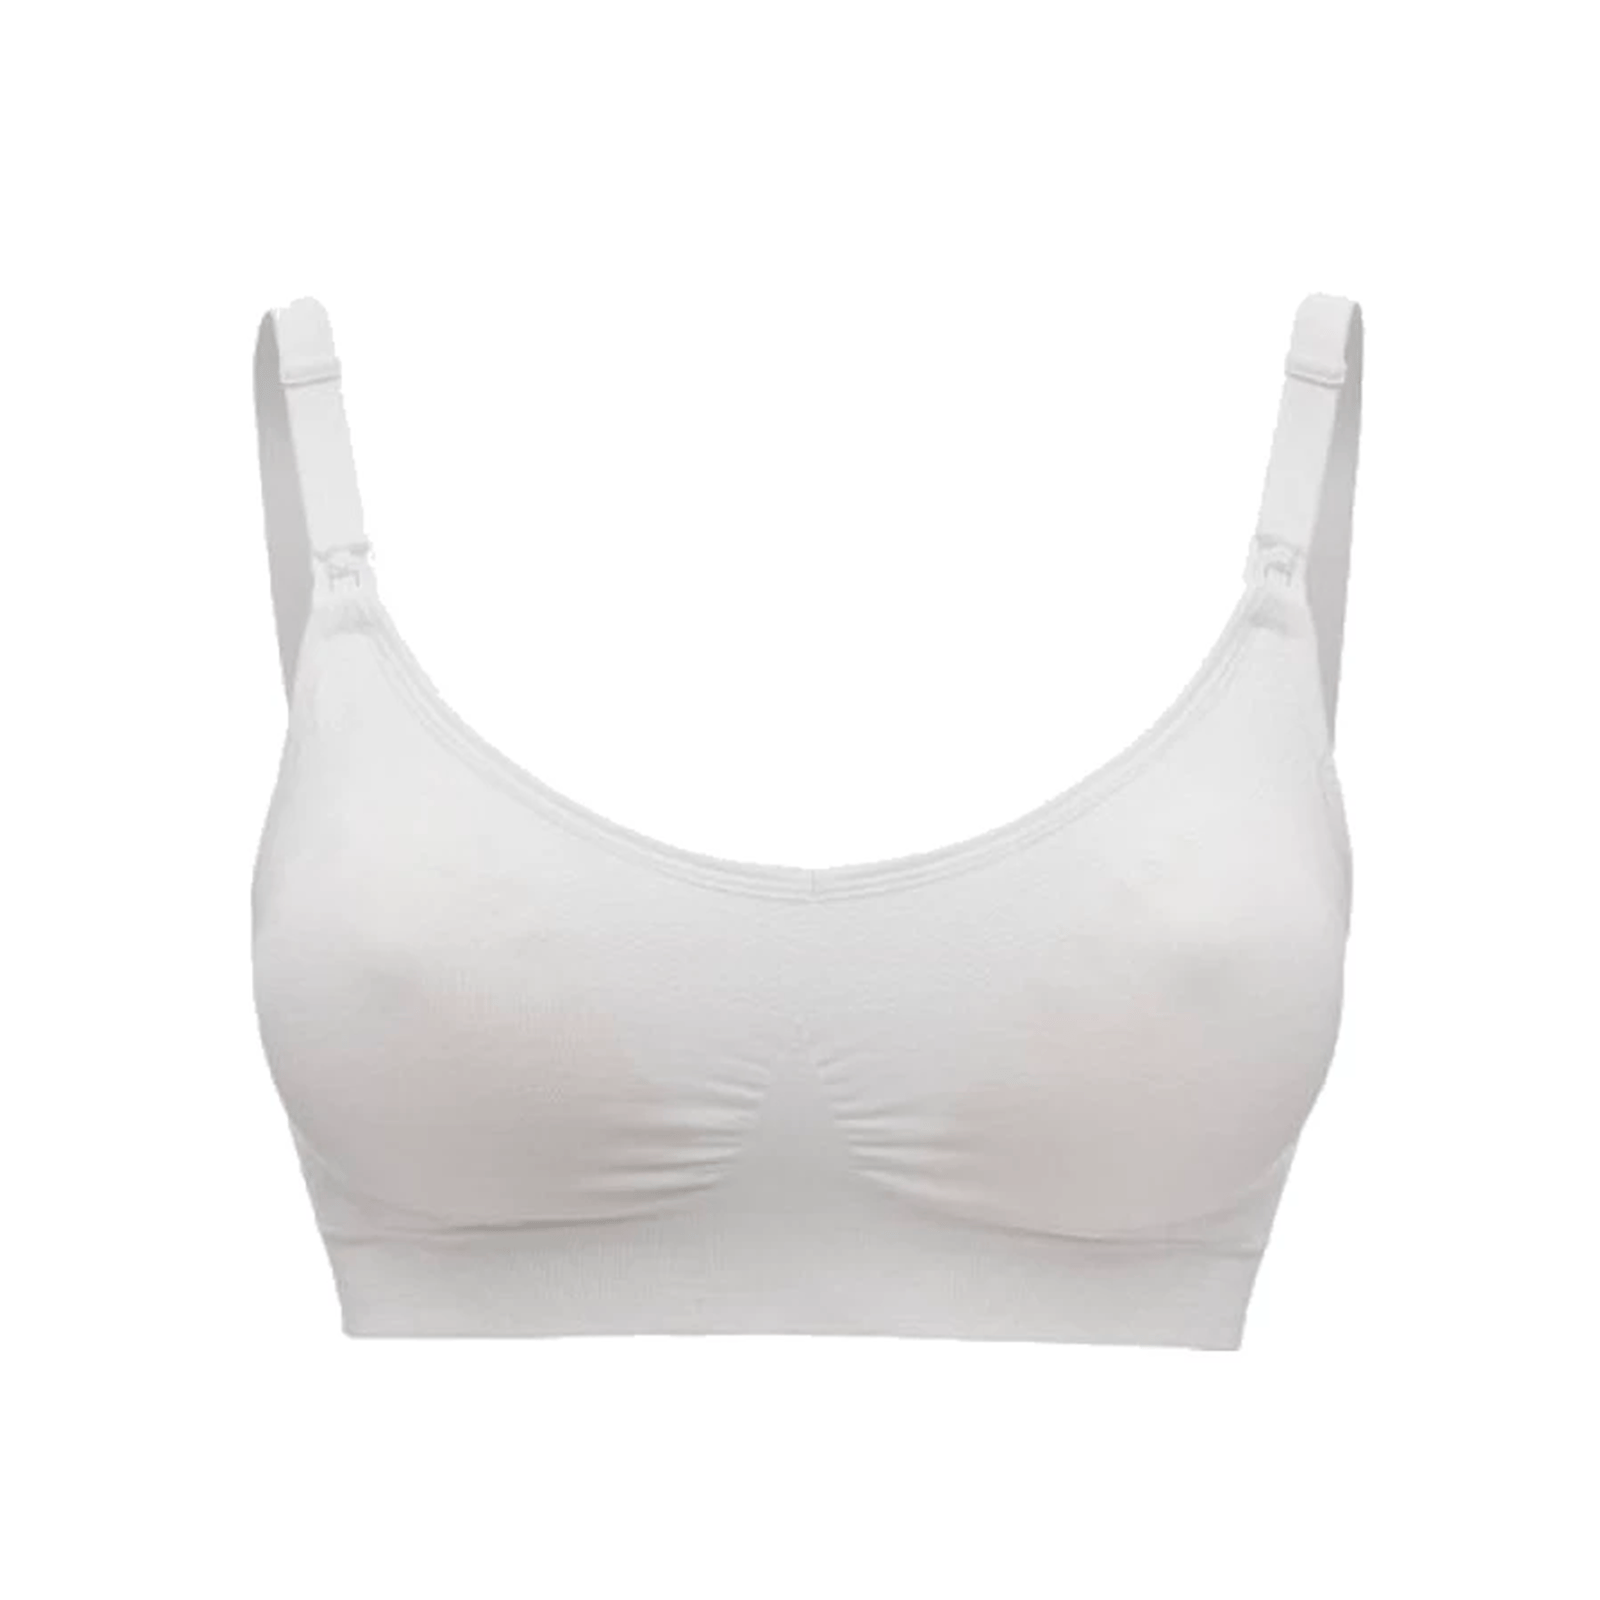 https://static.beautytocare.com/cdn-cgi/image/width=1600,height=1600,f=auto/media/catalog/product//m/e/medela-keep-cool-breathable-maternity-nursing-bra-white-small-x1.png